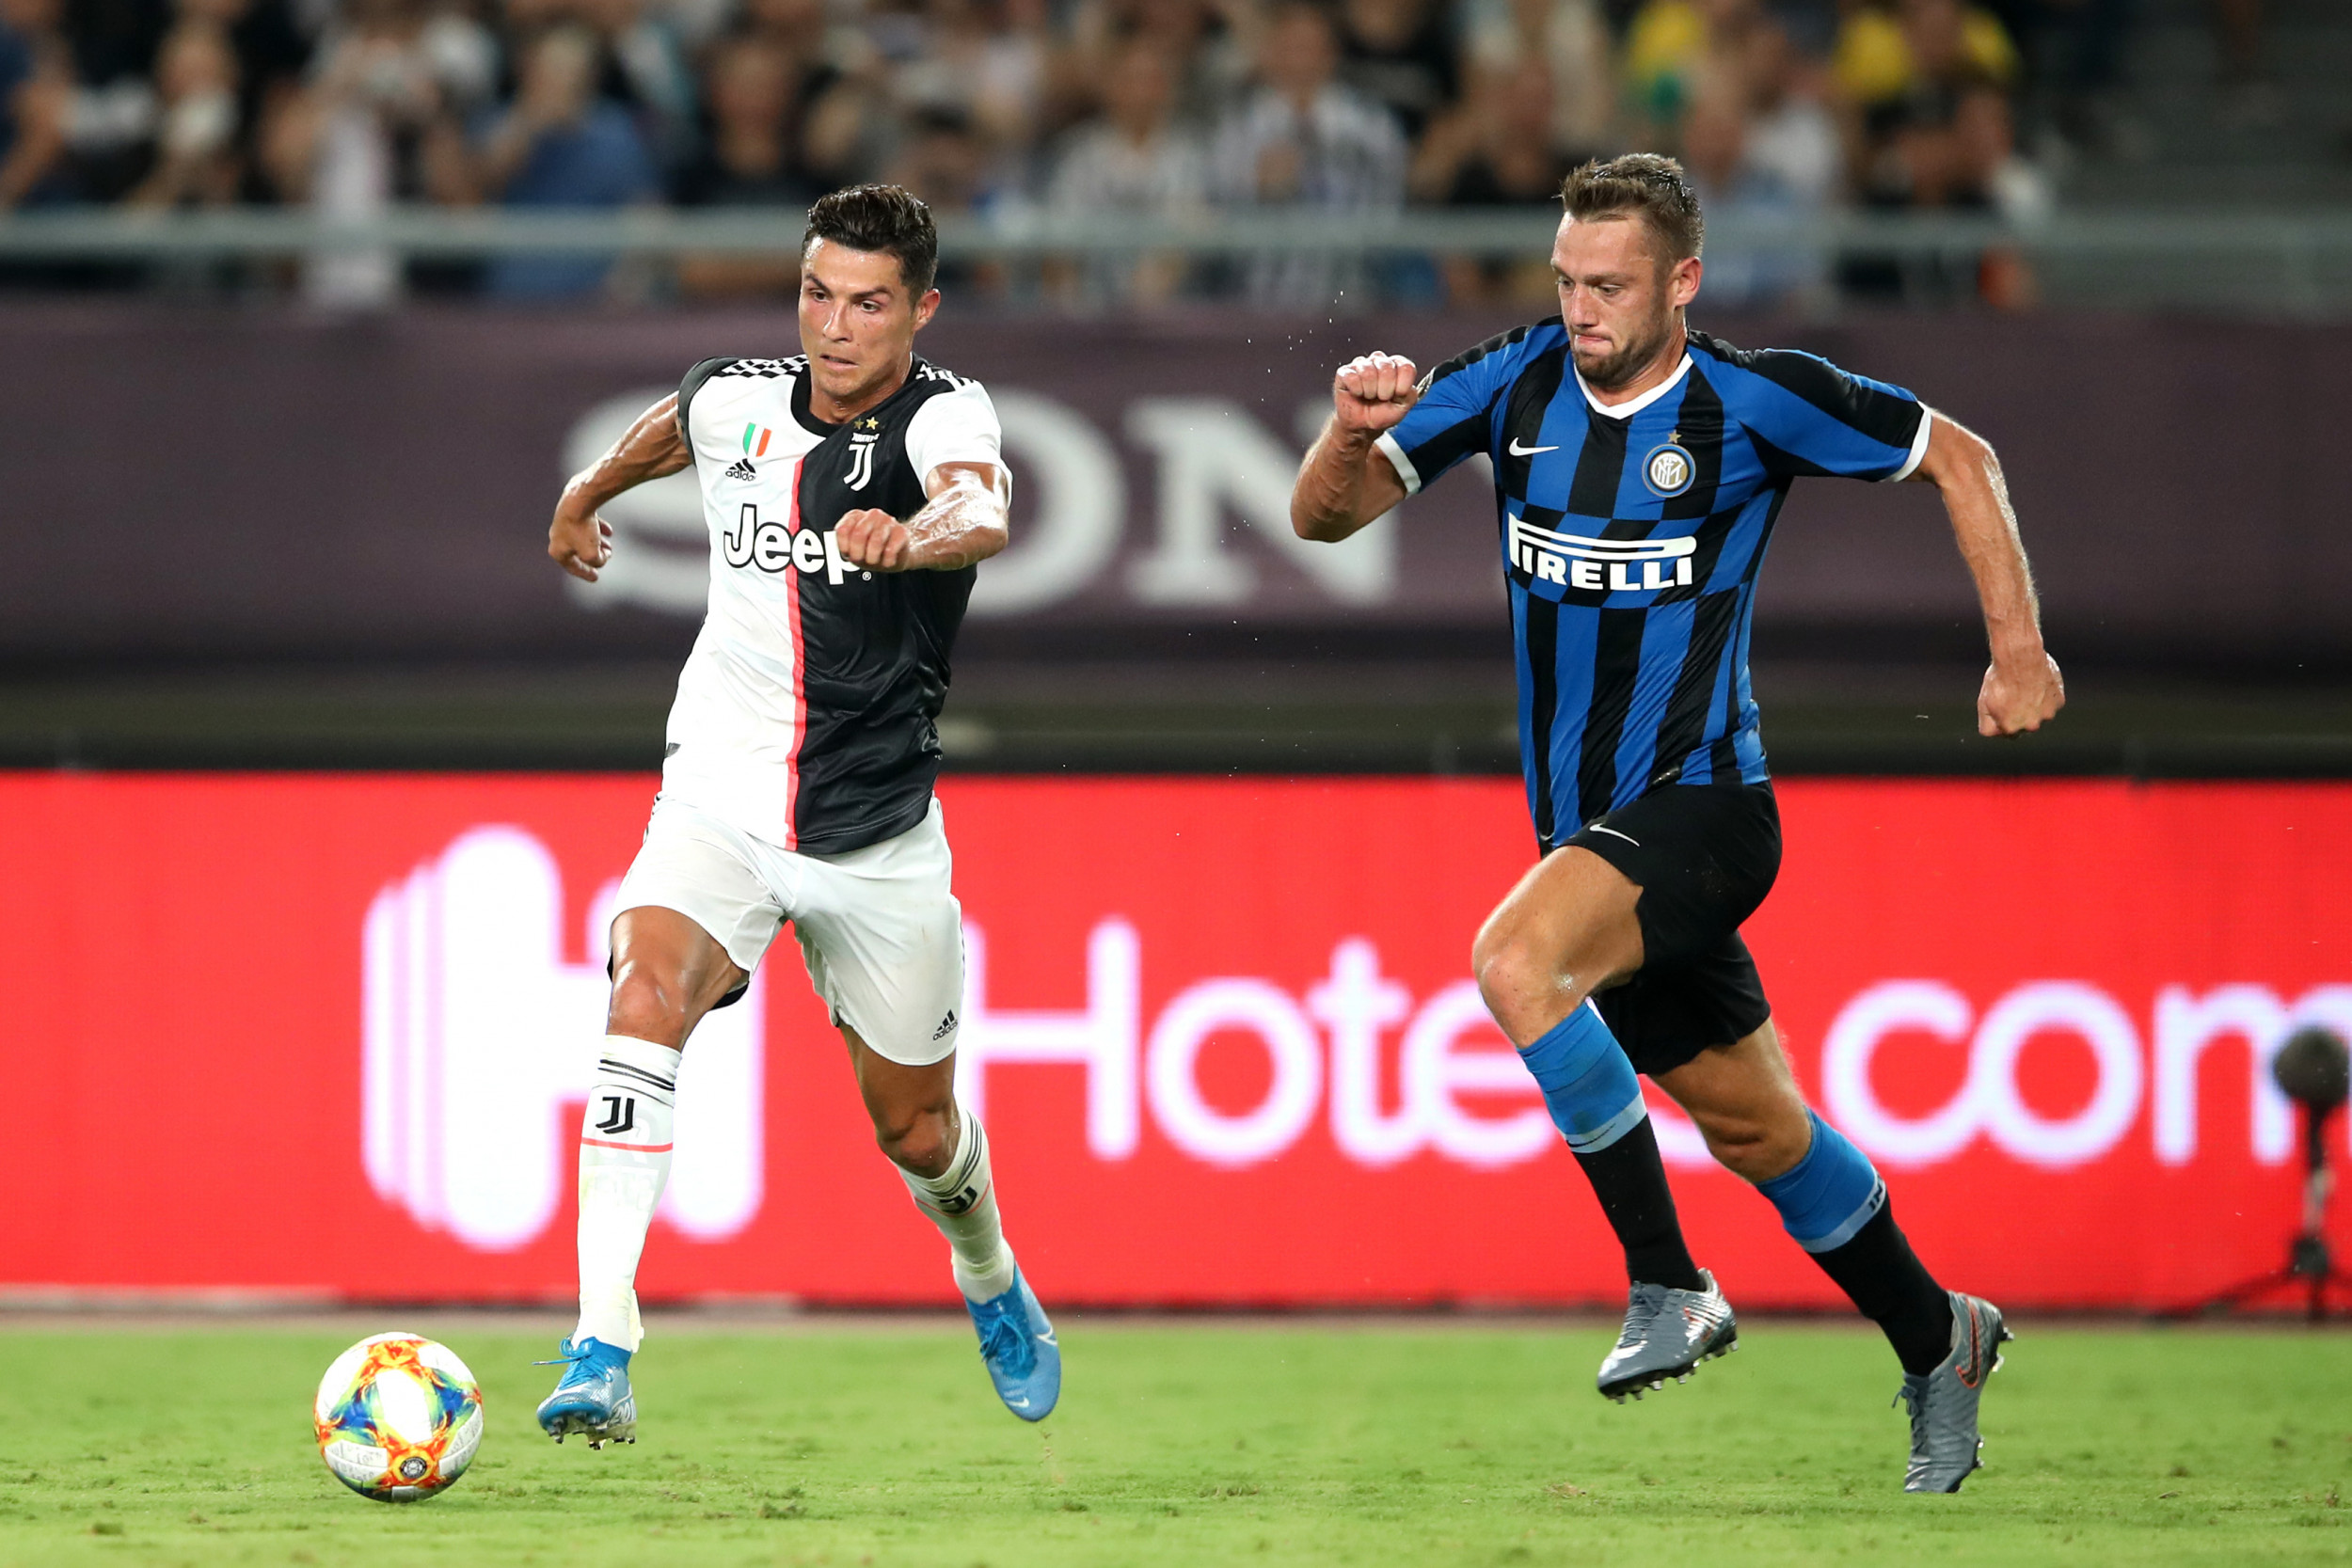 Inter Milan vs Juventus: Where to Watch Serie A, TV Channel, Live